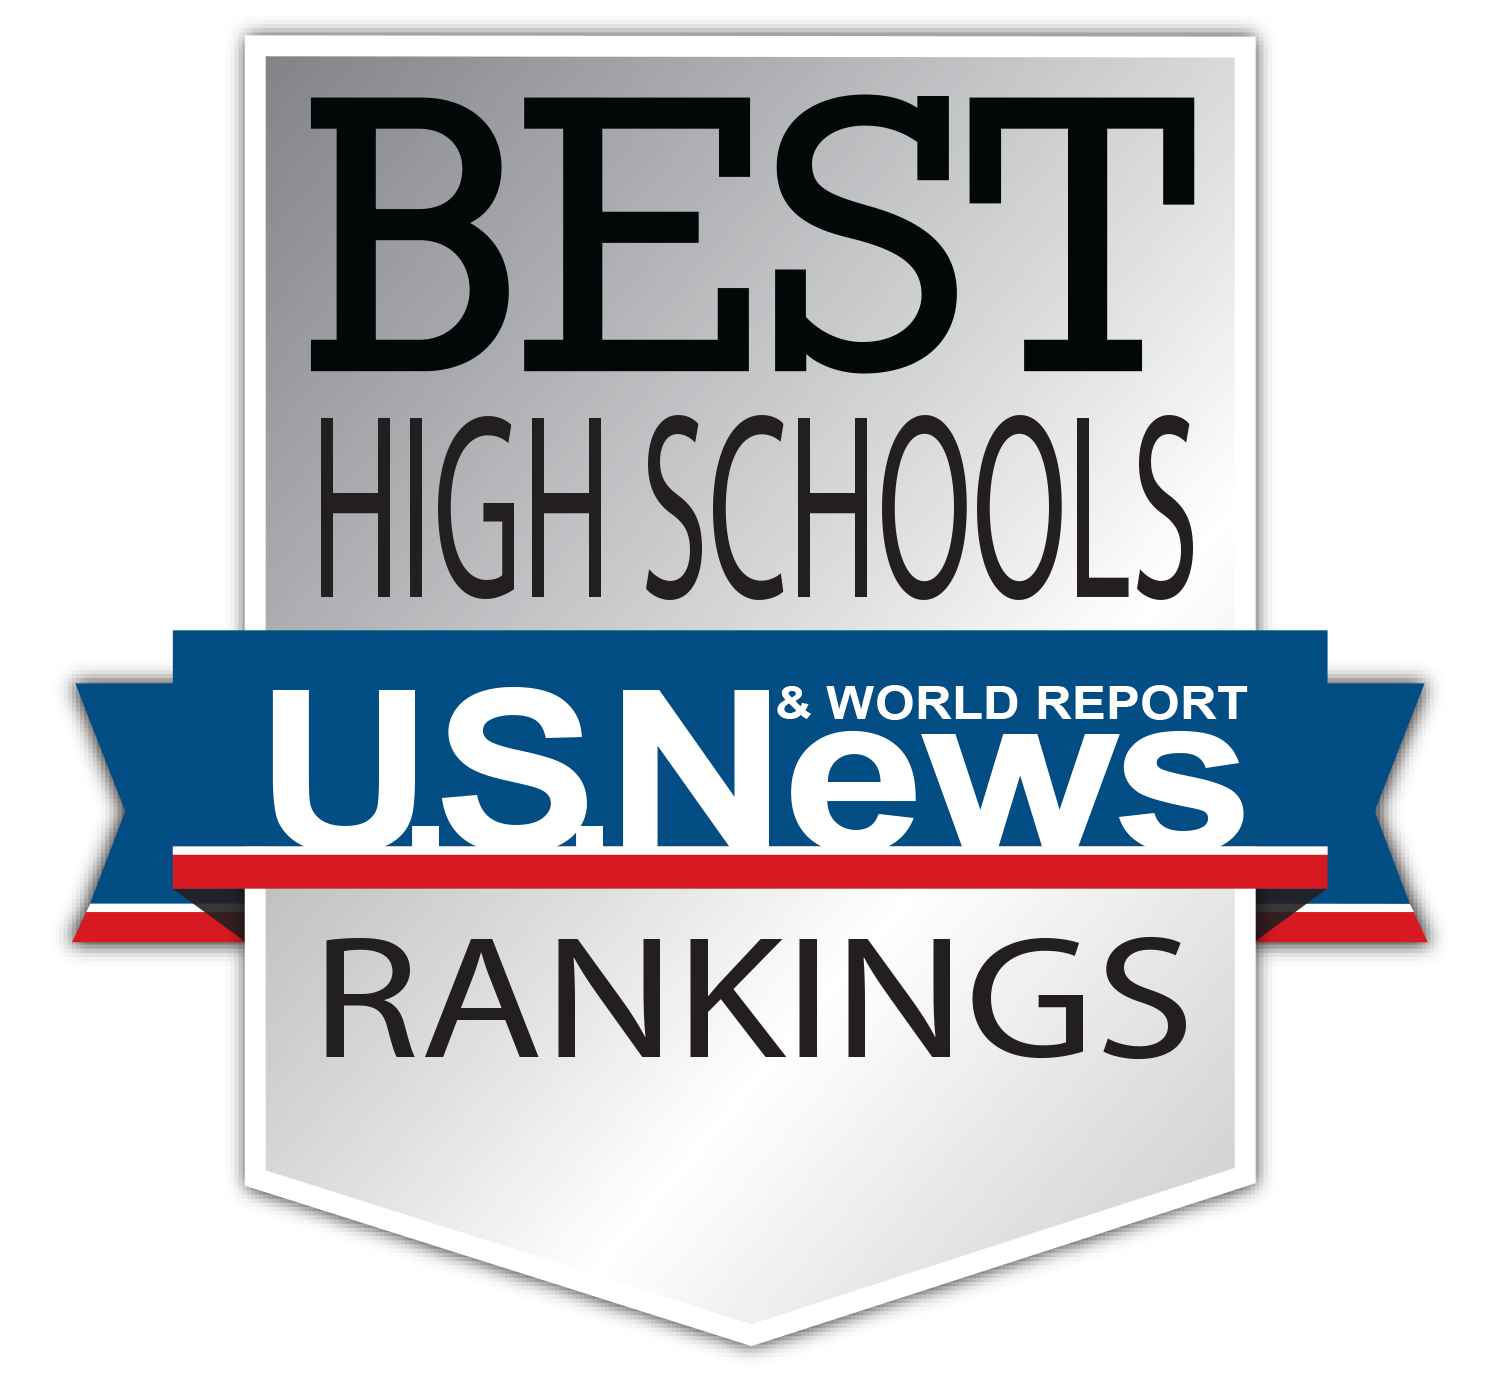 U.S. News and World Report Alliance in Top 5! The Alliance College